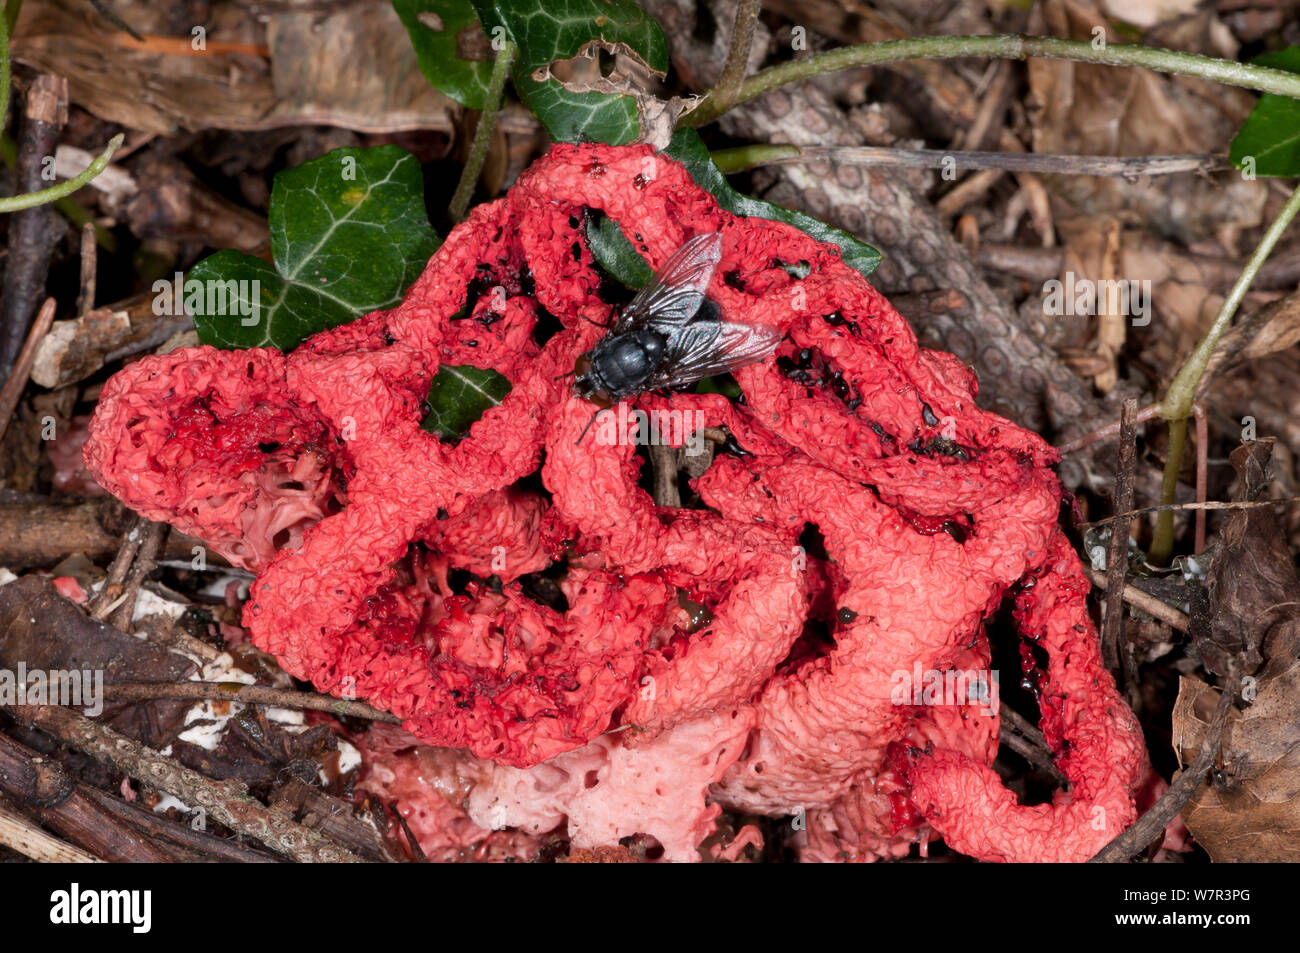 Basket Stinkhorn (Clathrus ruber) a fungus which resembles and smells like rotten flesh attracting flies as spore dispersers, near Castel Giorgio, Orvieto, Umbria, Italy, September Stock Photo